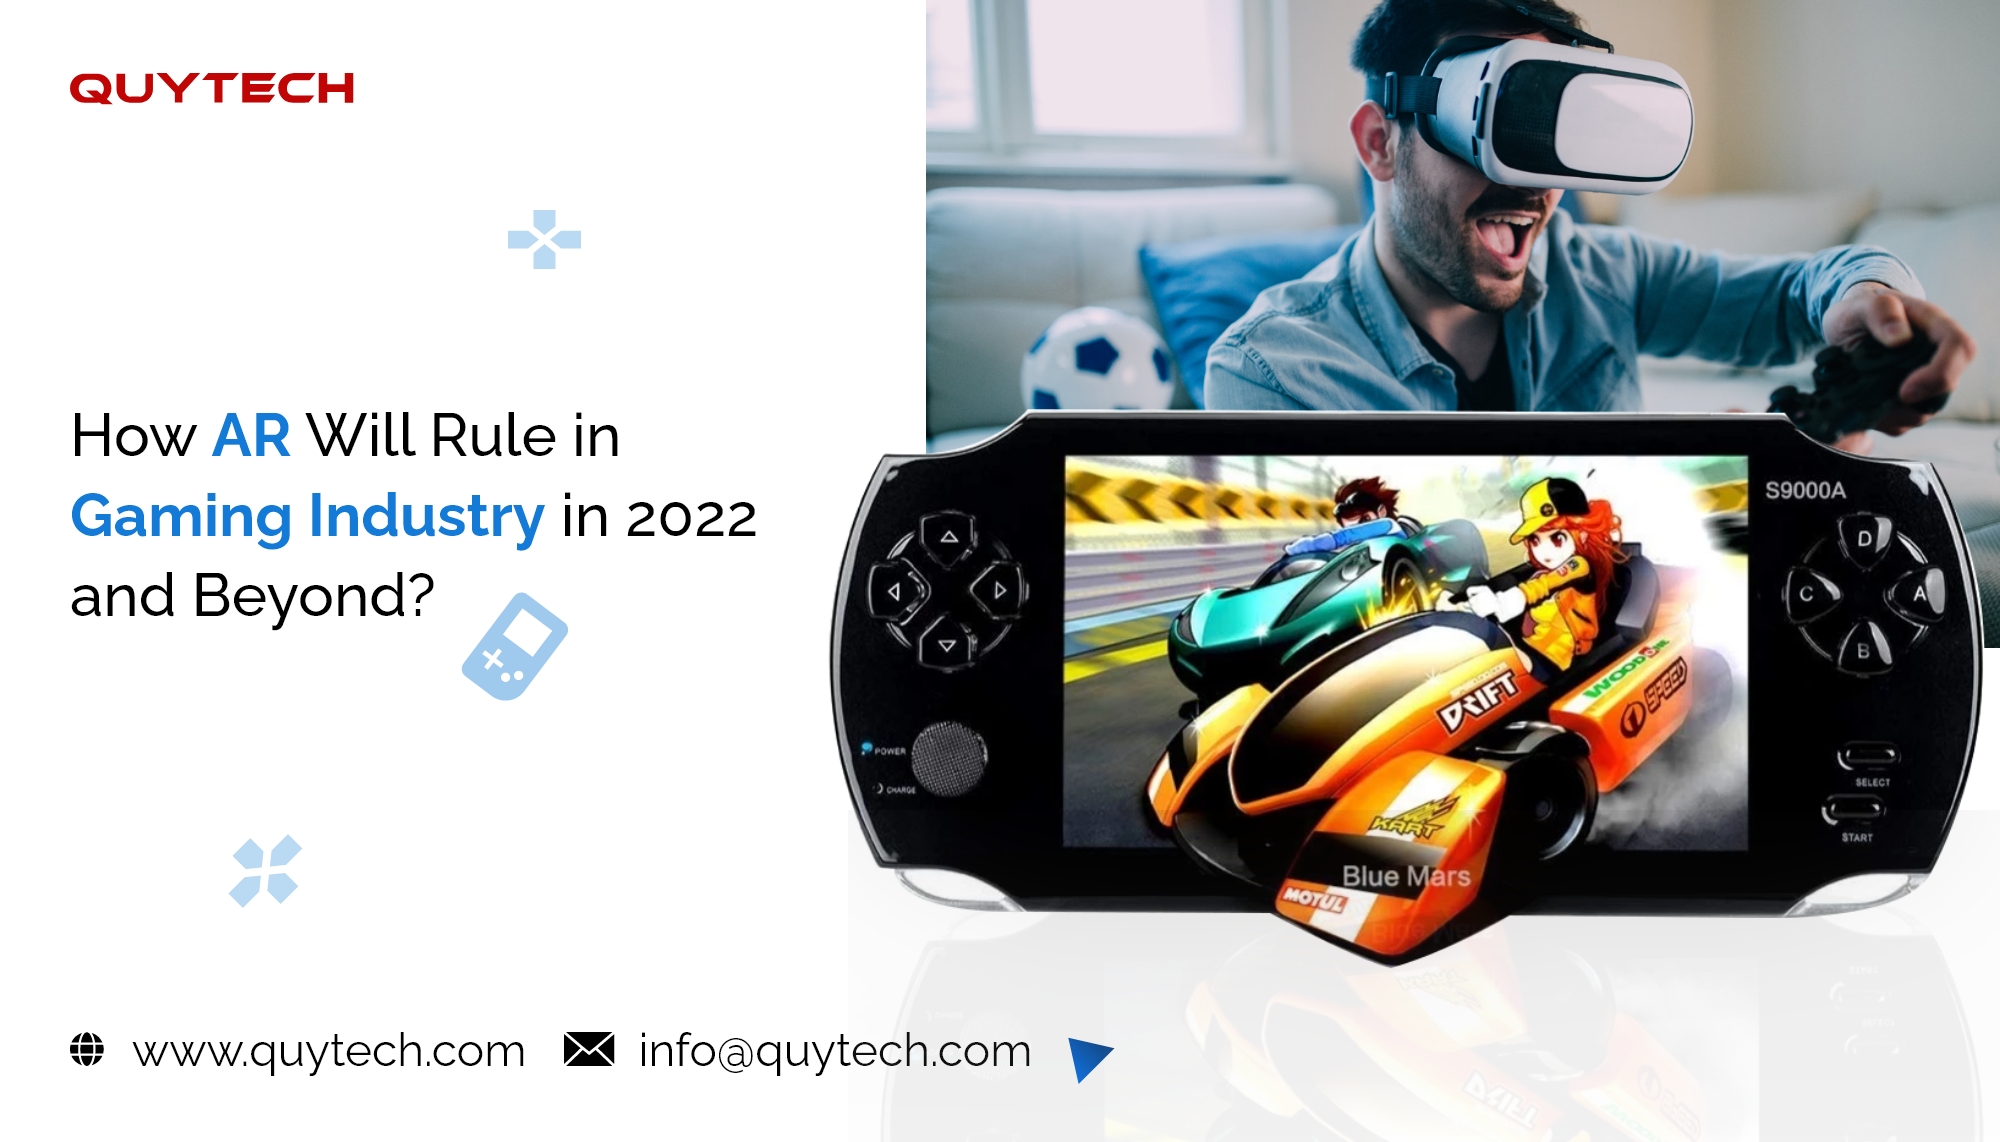 How AR Will Rule in Gaming Industry in 2022 and Beyond?